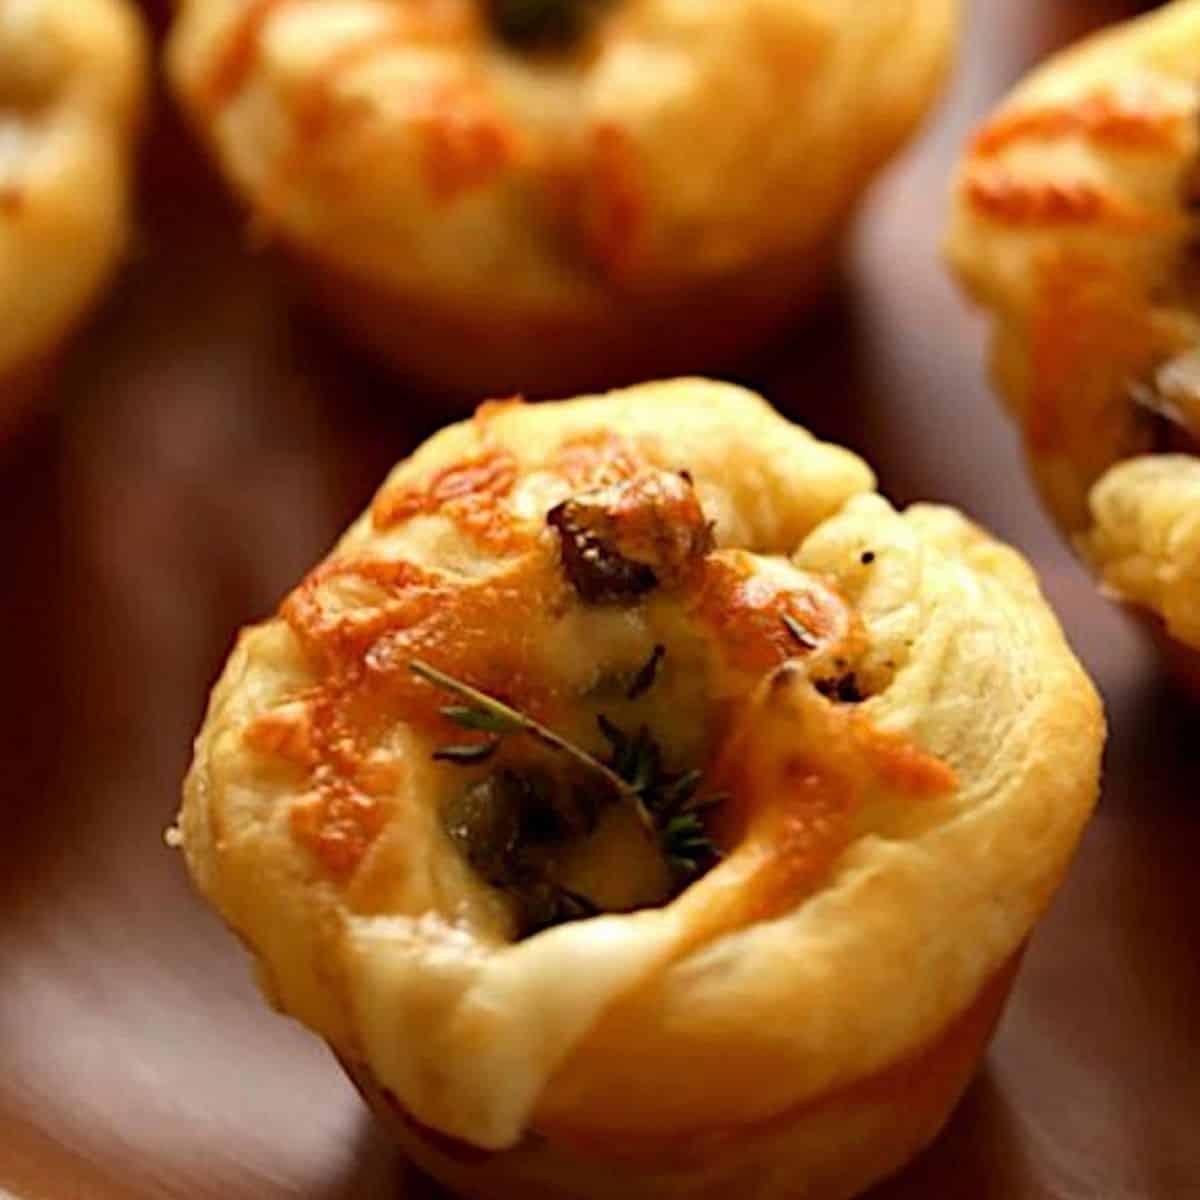 Mushroom Tartlets with Thyme and Cheese